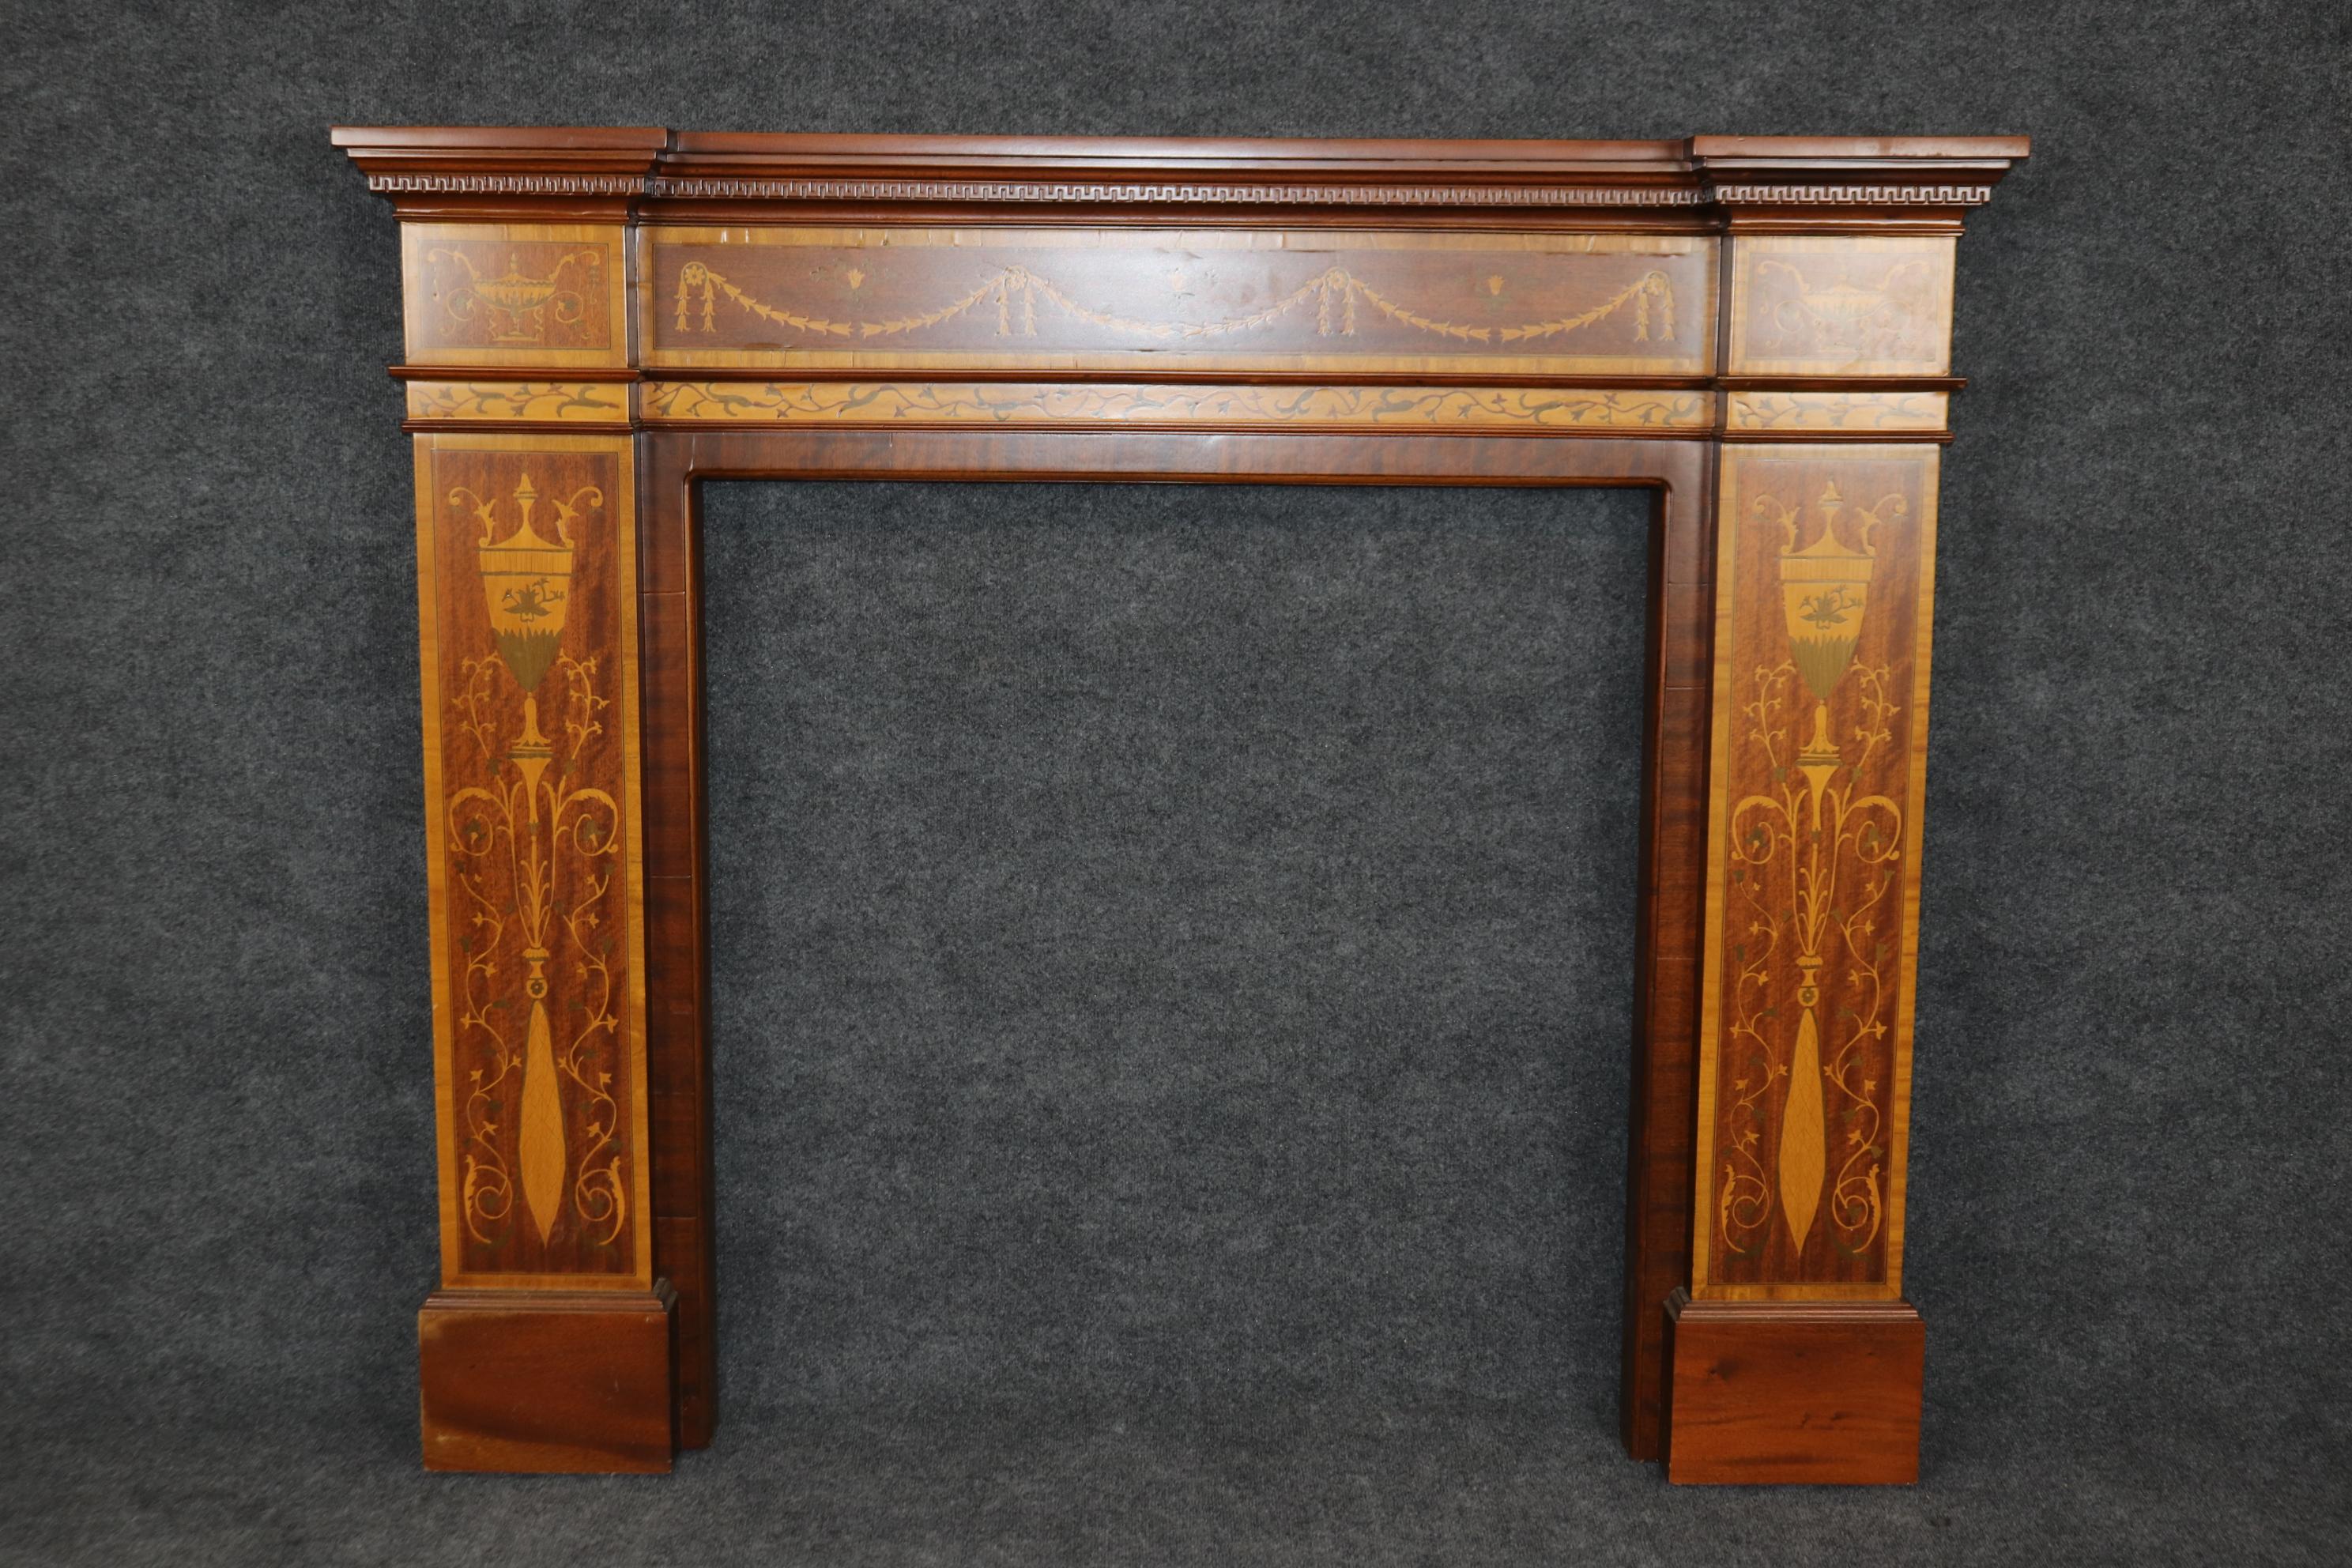 This is a superbly crafted hand-made one of a kind, custom-made Edwardian style mantel. The mantel was made specifically to match with an Edwardian design decor in the home it came from. It cost a small fortune to make for the original buyer. It is